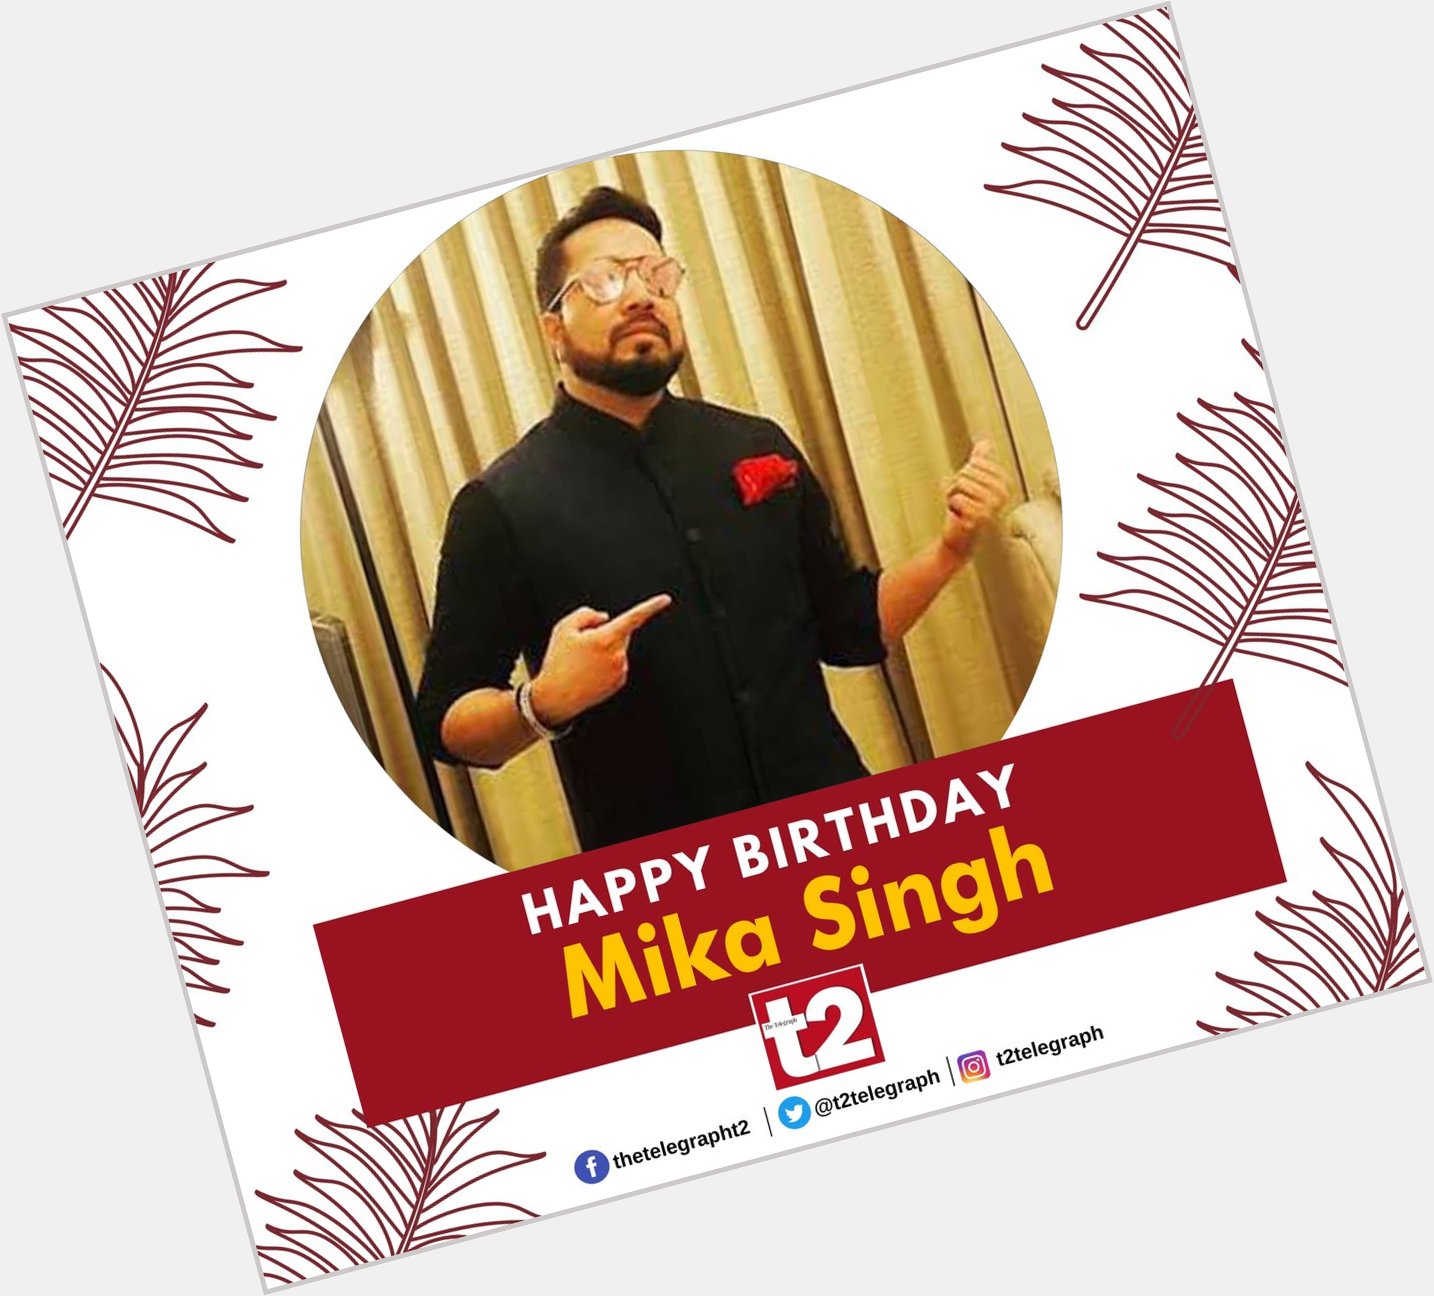 T2 wishes the life of every party, Mika Singh, a happy birthday! 